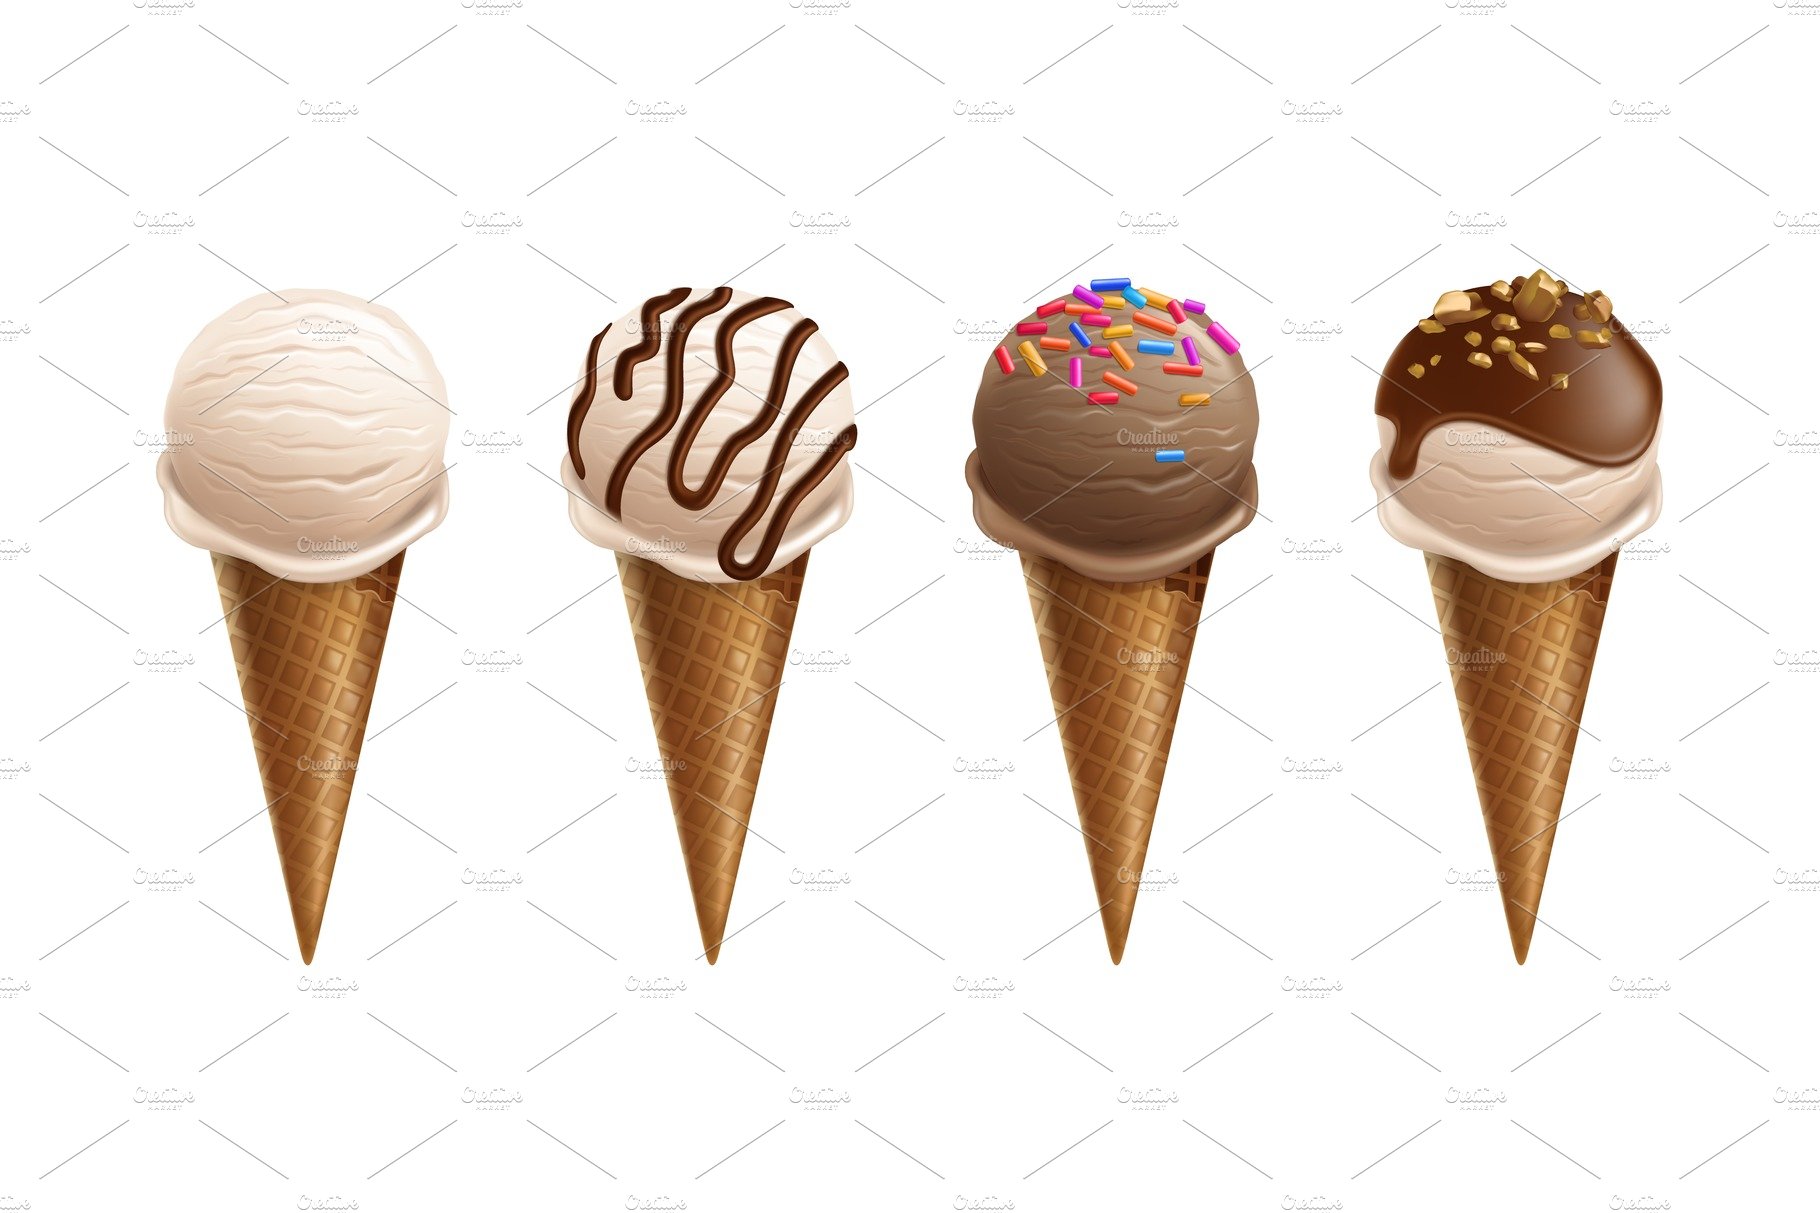 Ice cream scoops in wafer cone cover image.